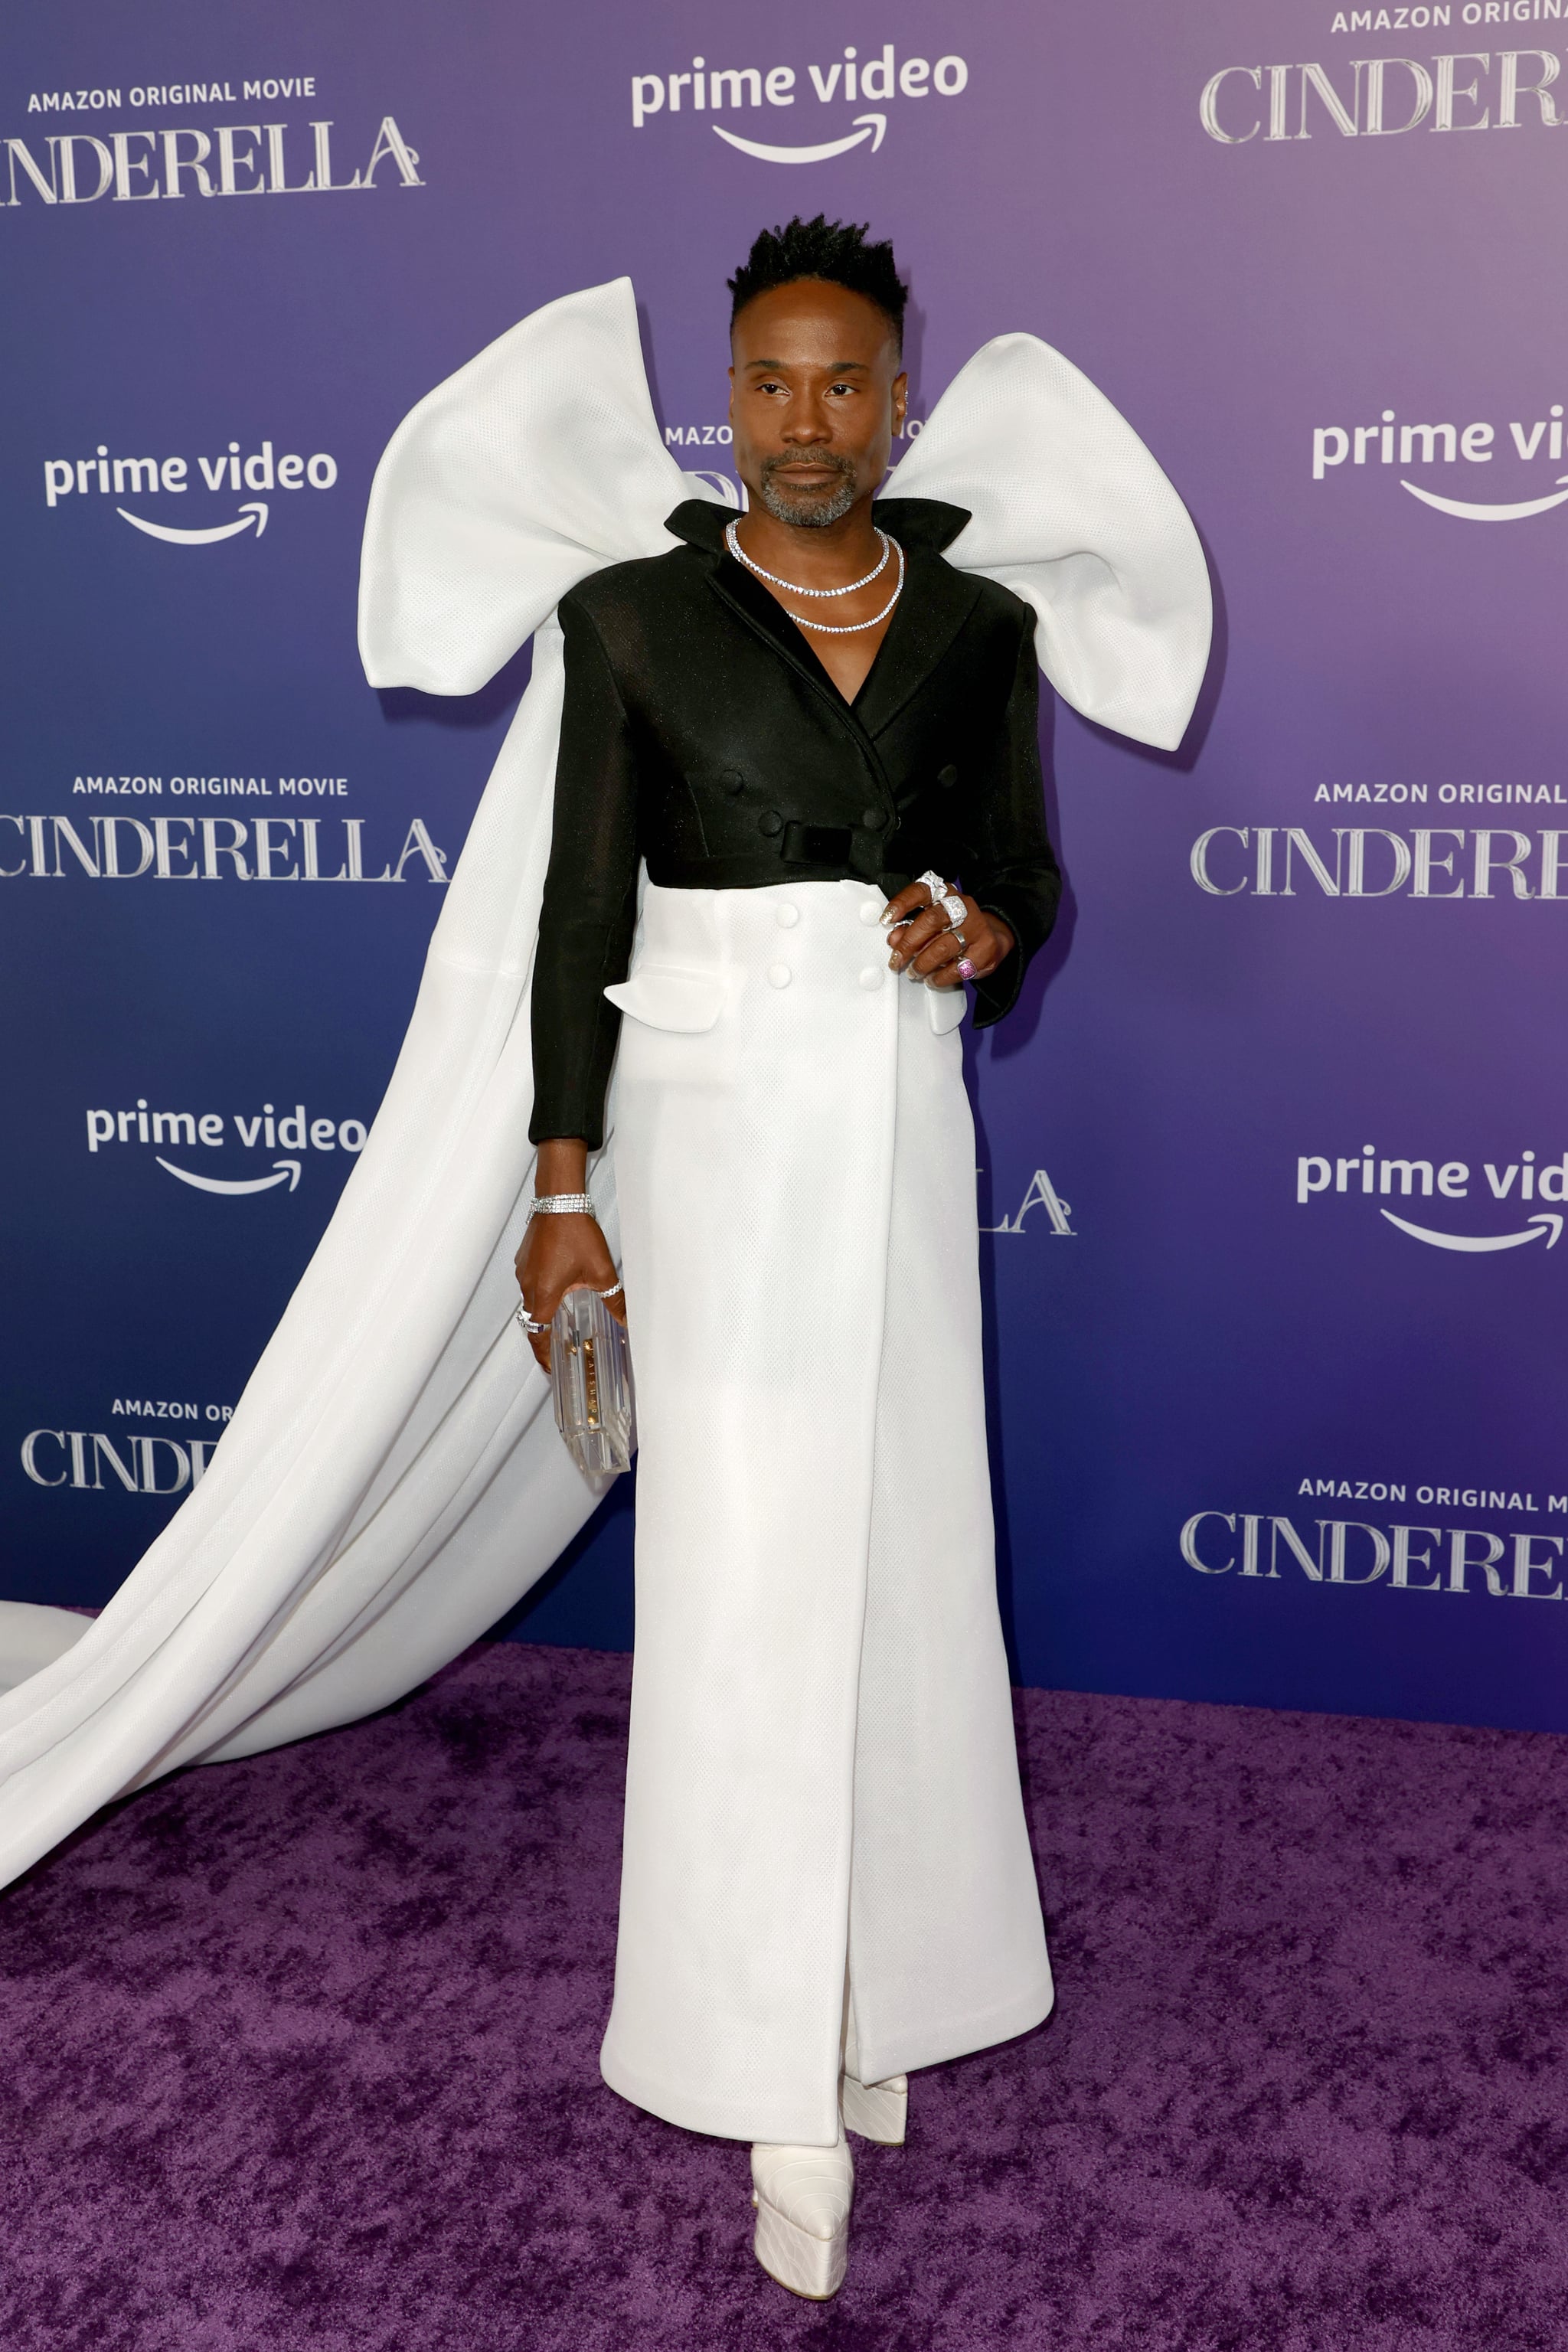 Billy Porter Christian Siriano Gown at the 2019 Oscars | POPSUGAR Fashion UK